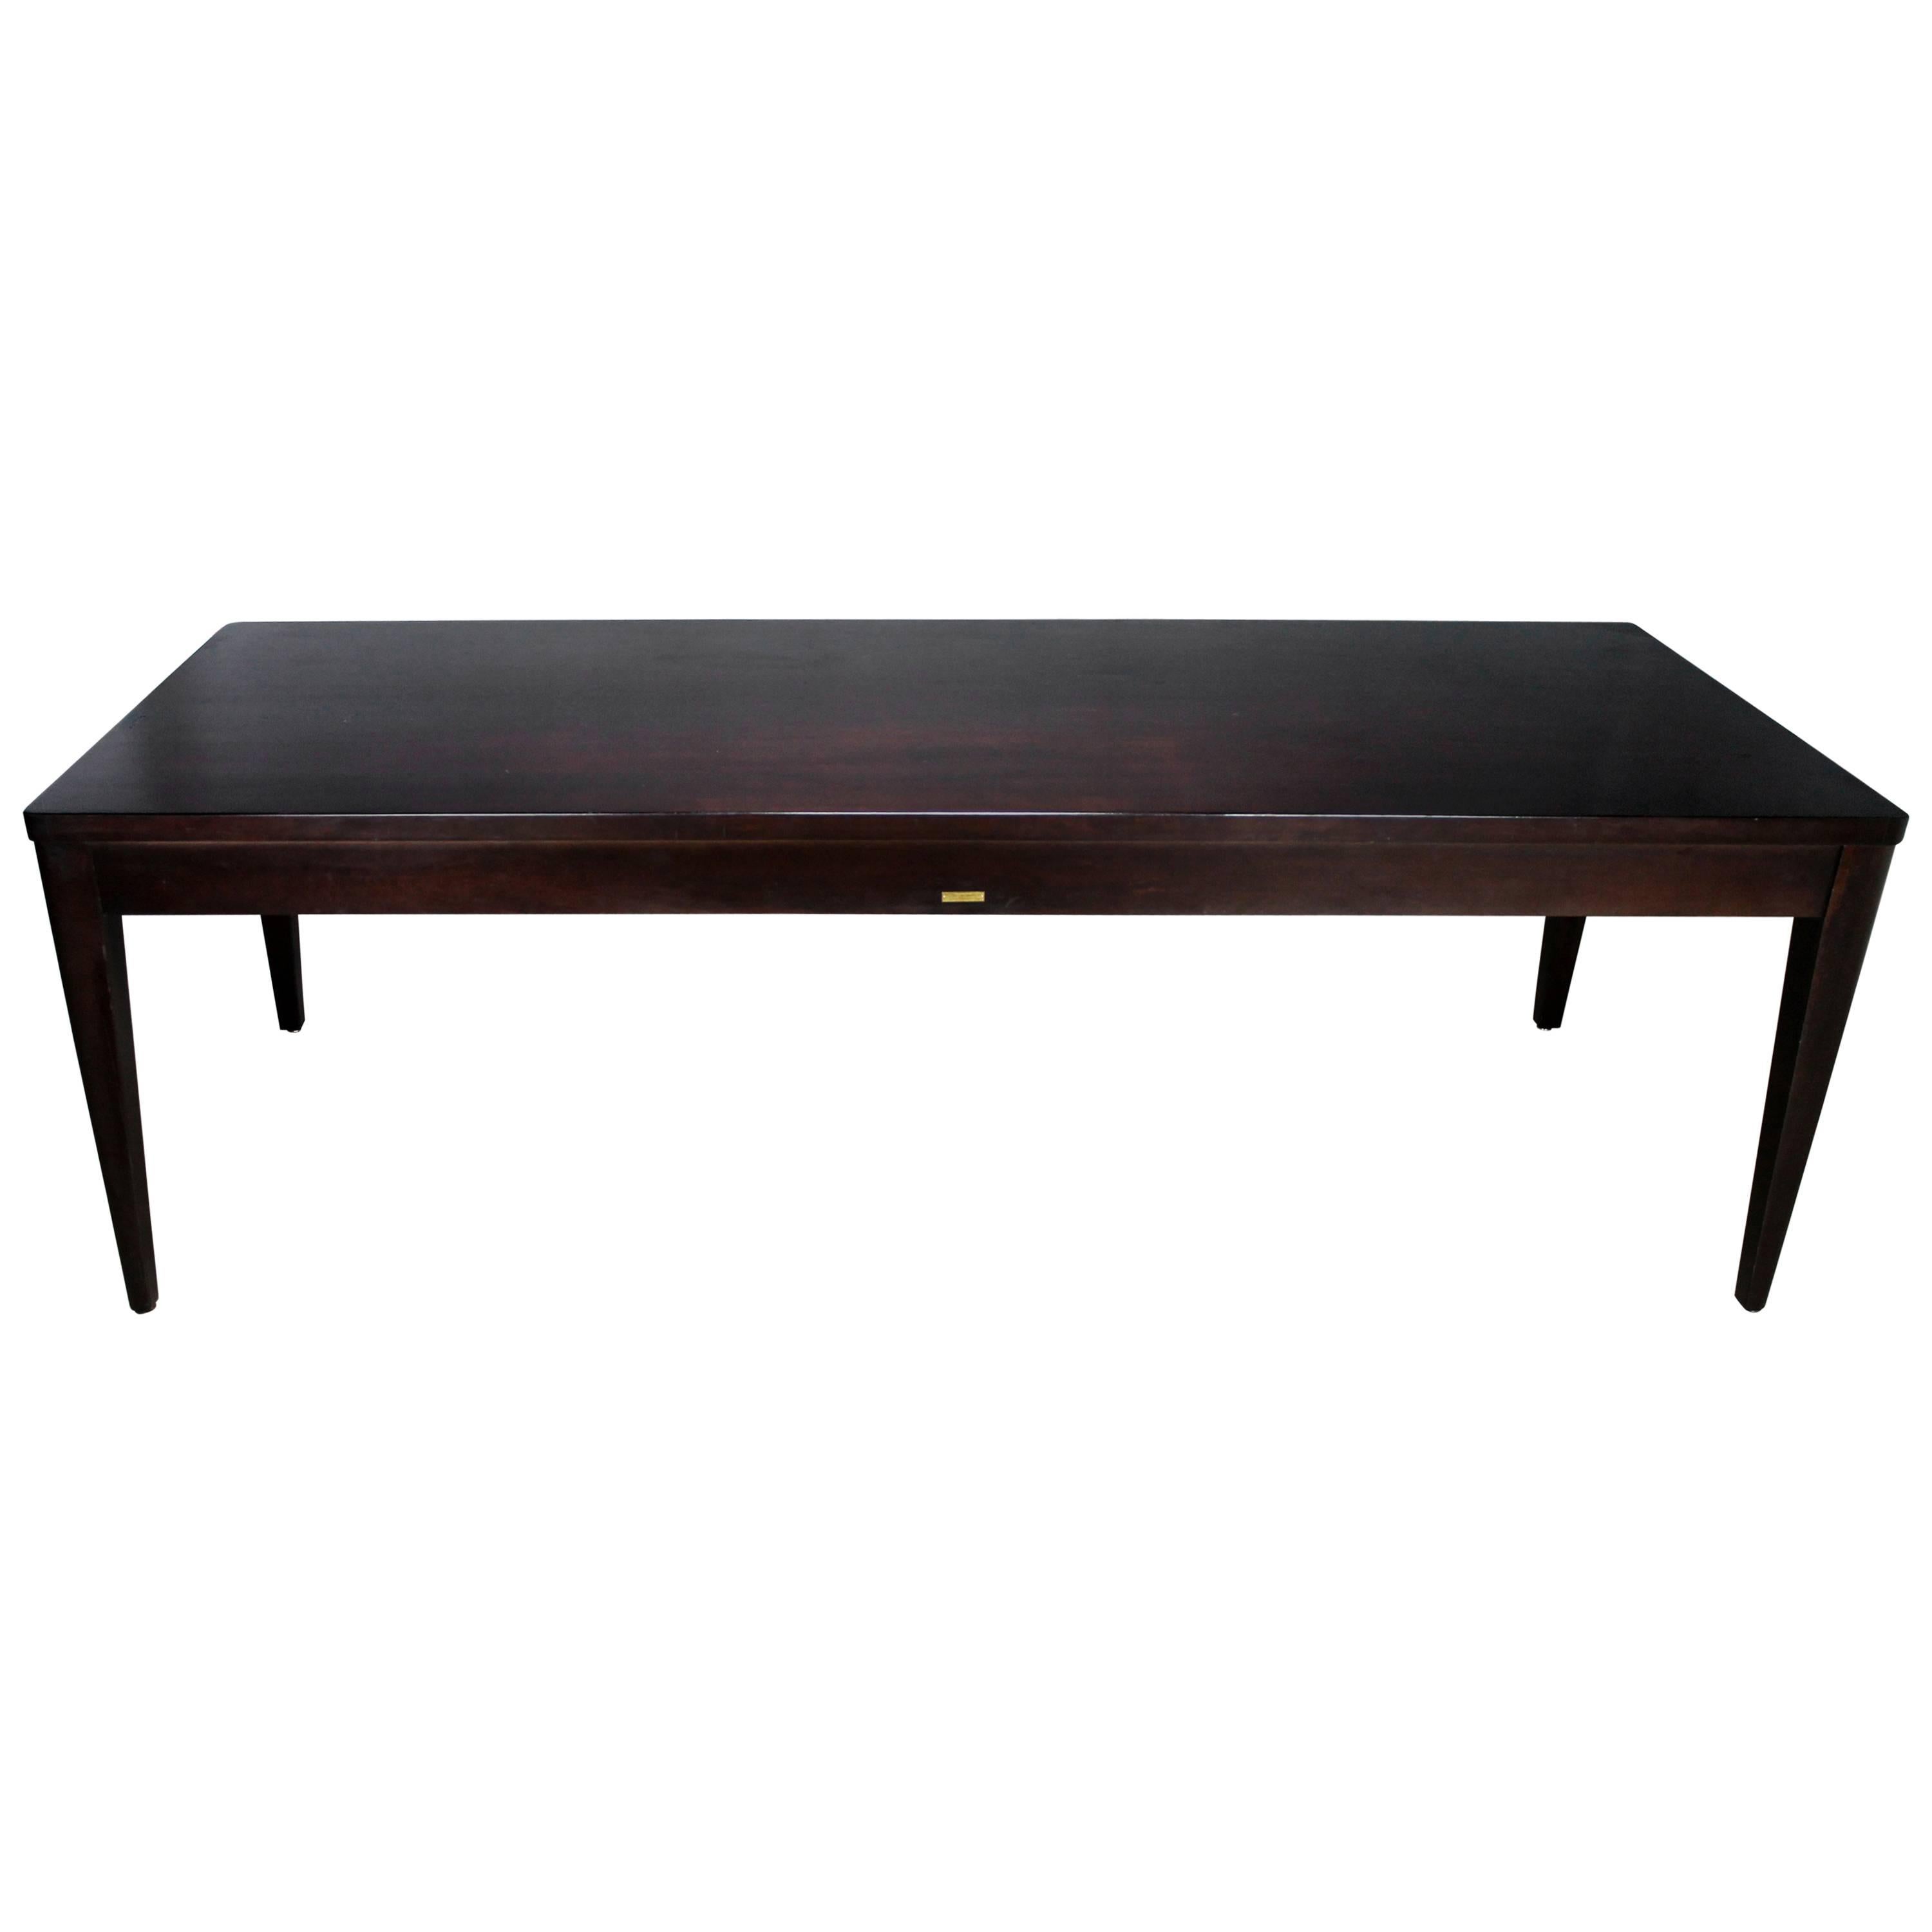 Library Style Dark Espresso Stained Maple Dining Table Bro-Dart Vintage Modern